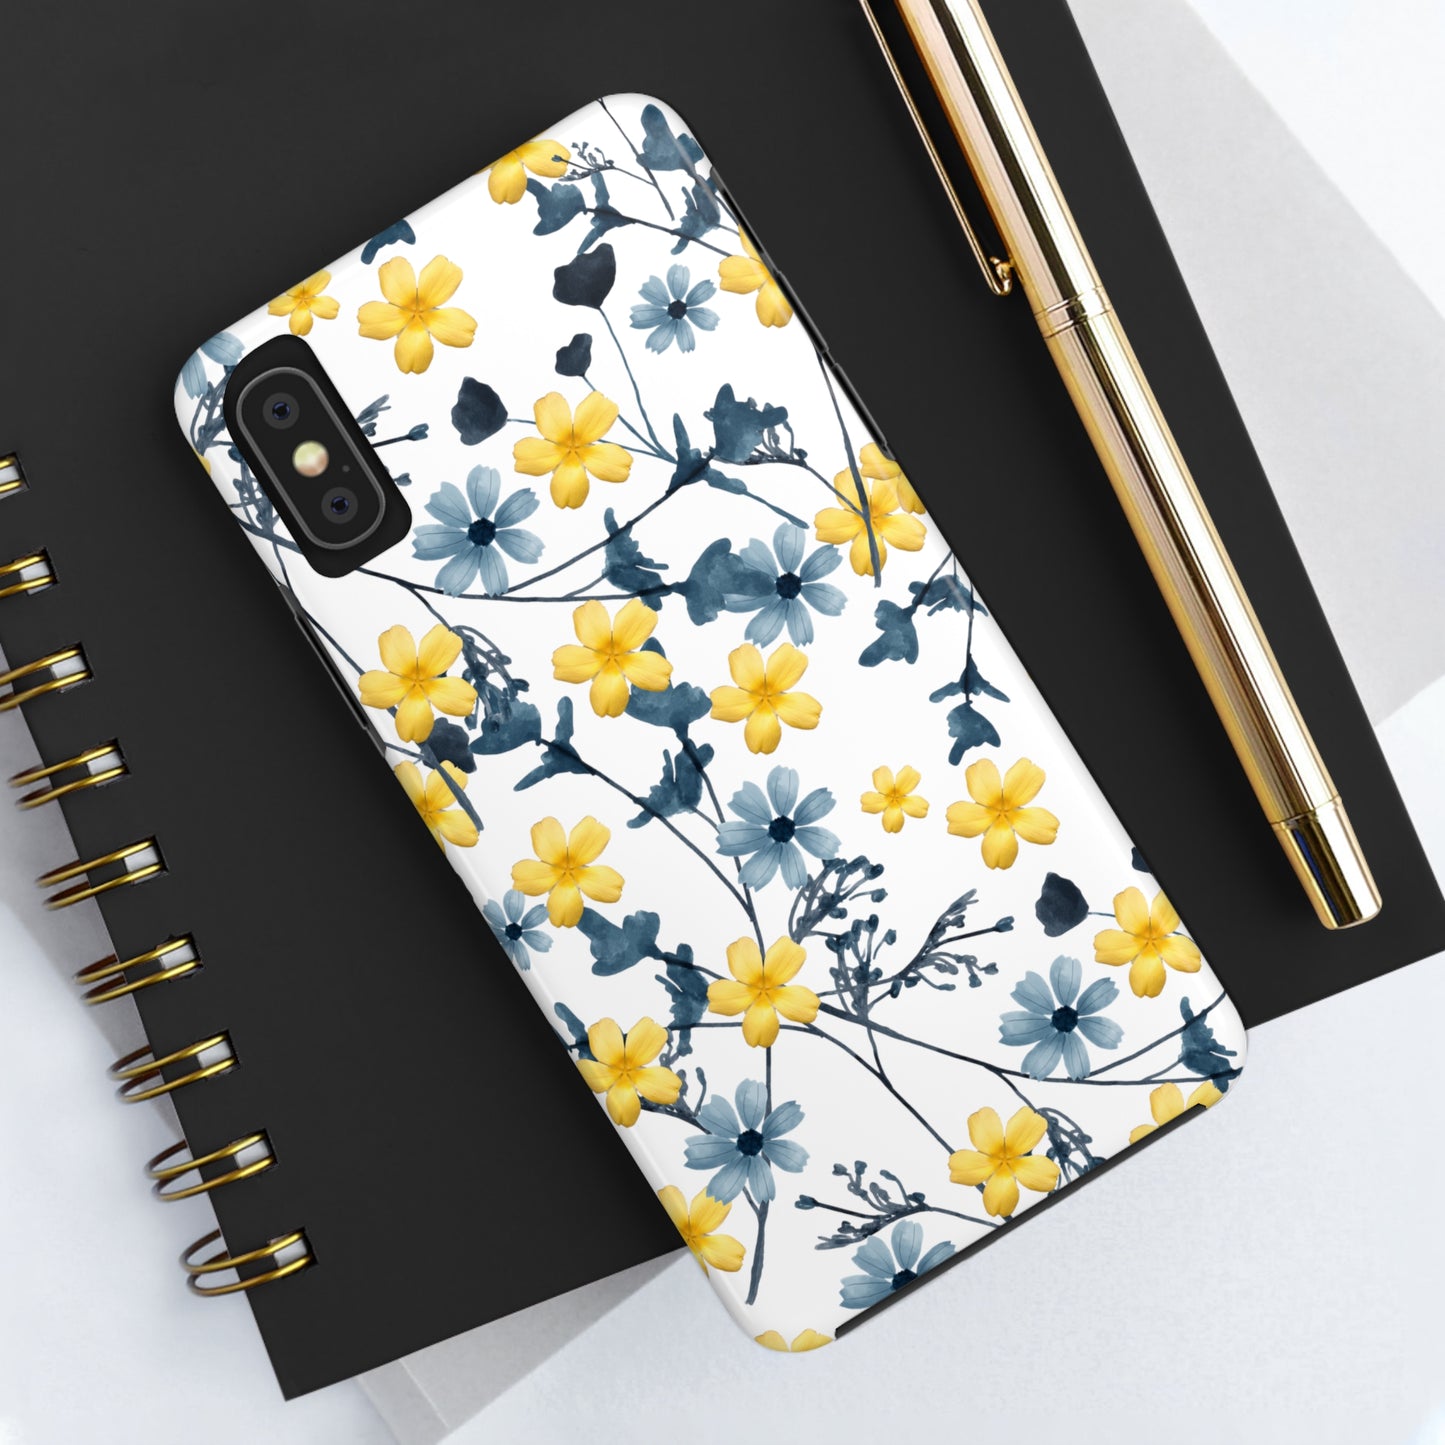 Yelllow Flower Iphone Case / Blue Iphone Case